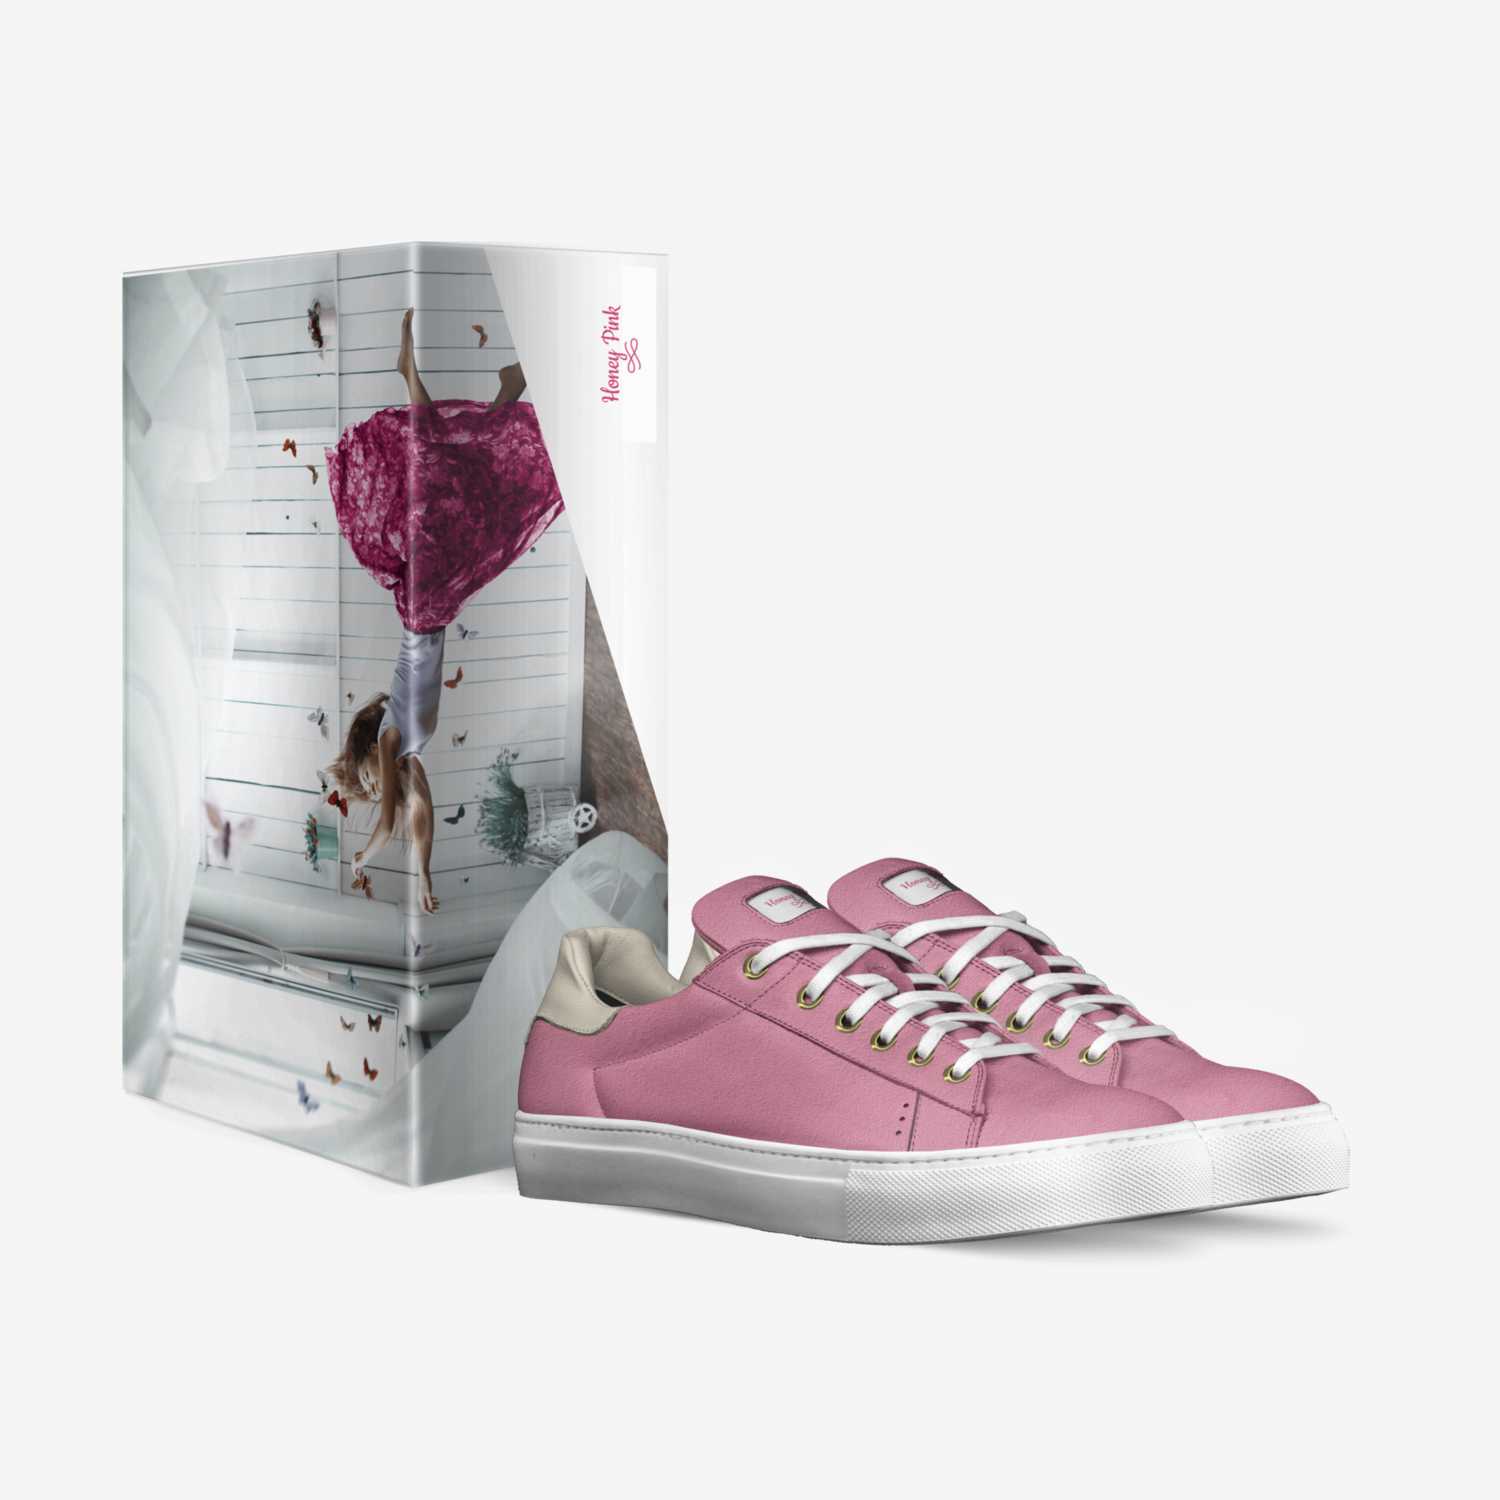 Honey Pink custom made in Italy shoes by Bls Footwear | Box view